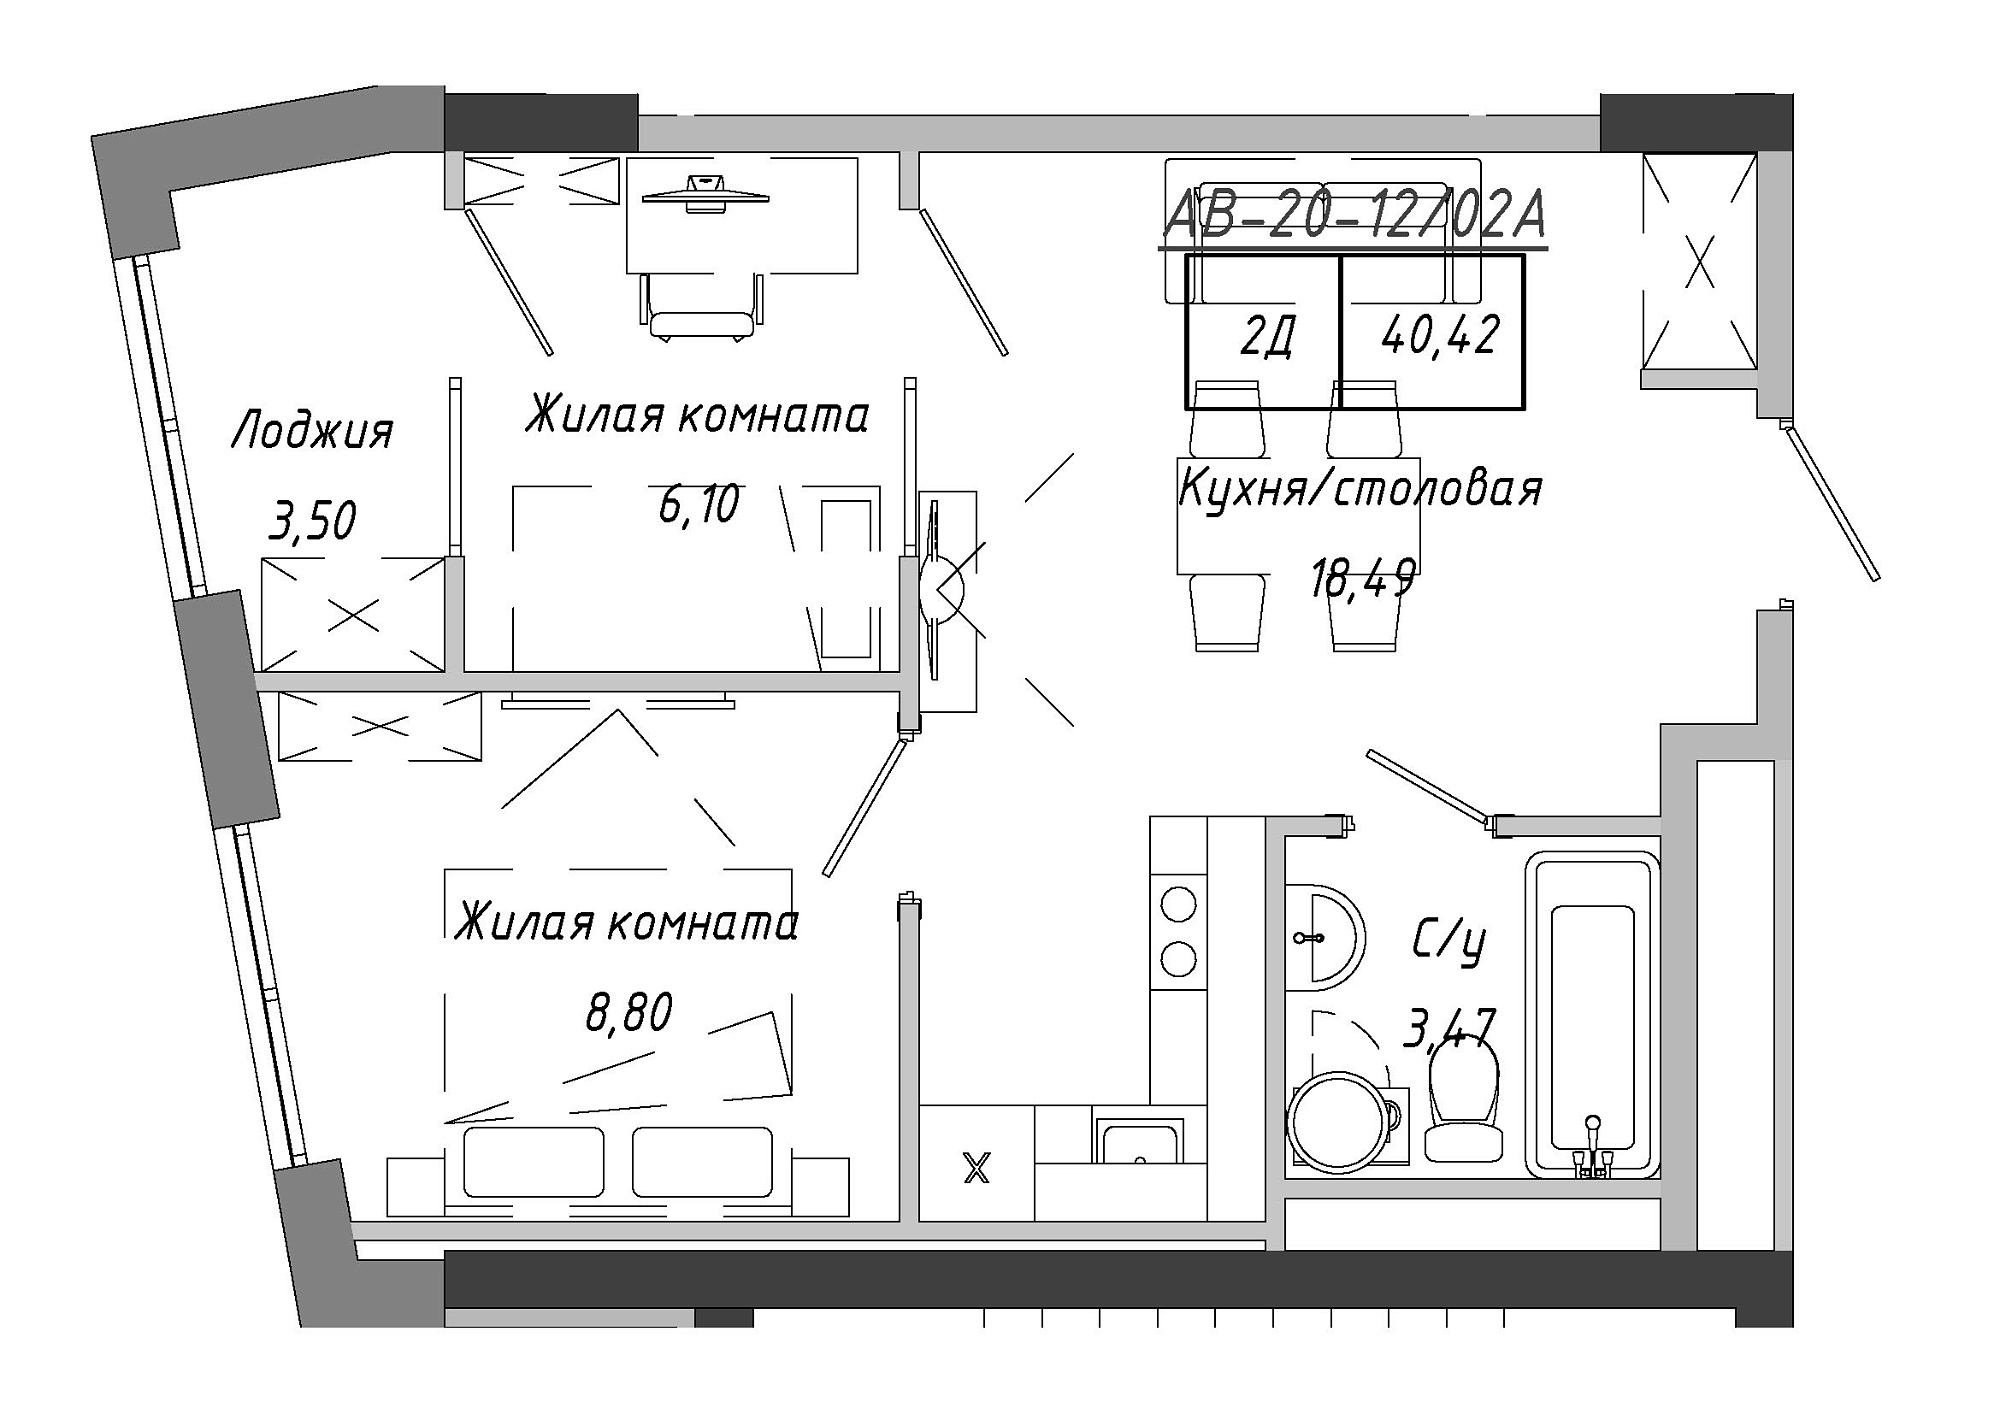 Planning 2-rm flats area 41.9m2, AB-20-12/0002а.